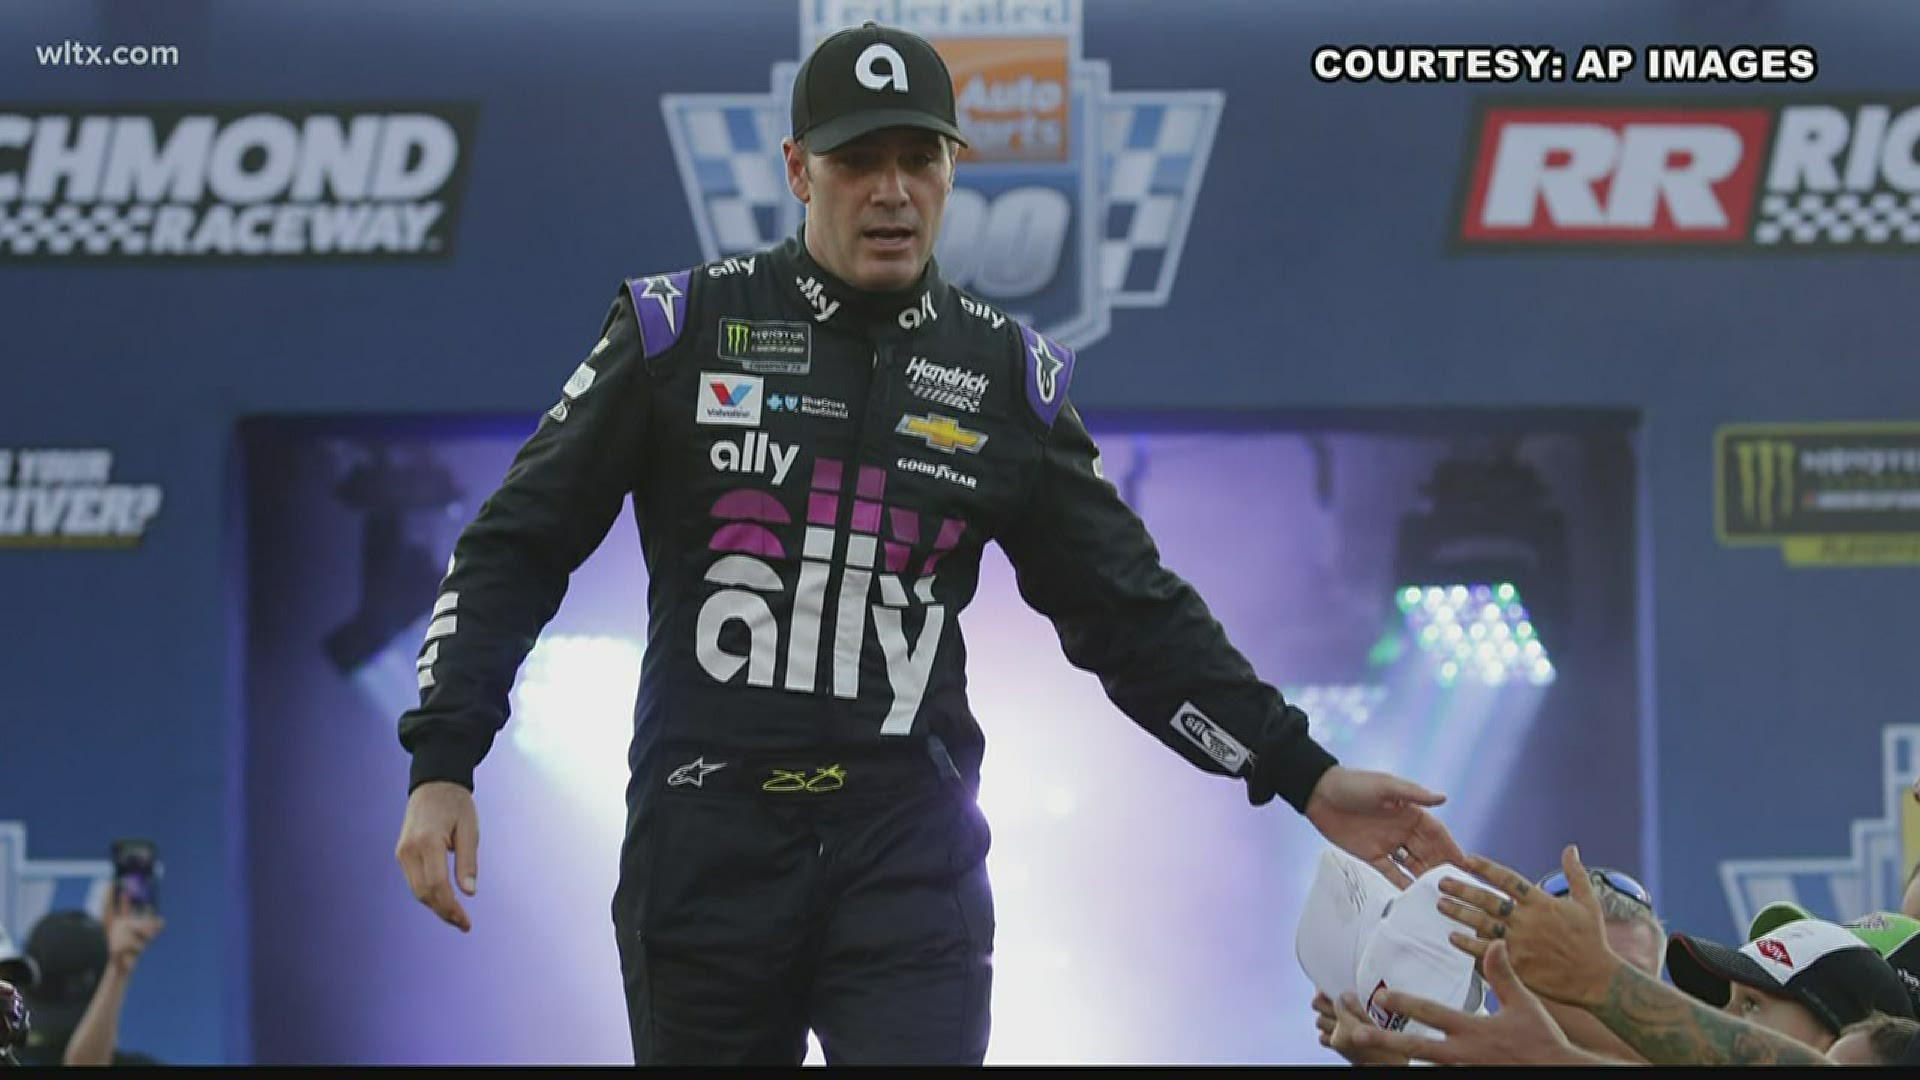 NASCAR driver Jimmie Johnson will not be competing on the track until he is medically cleared.